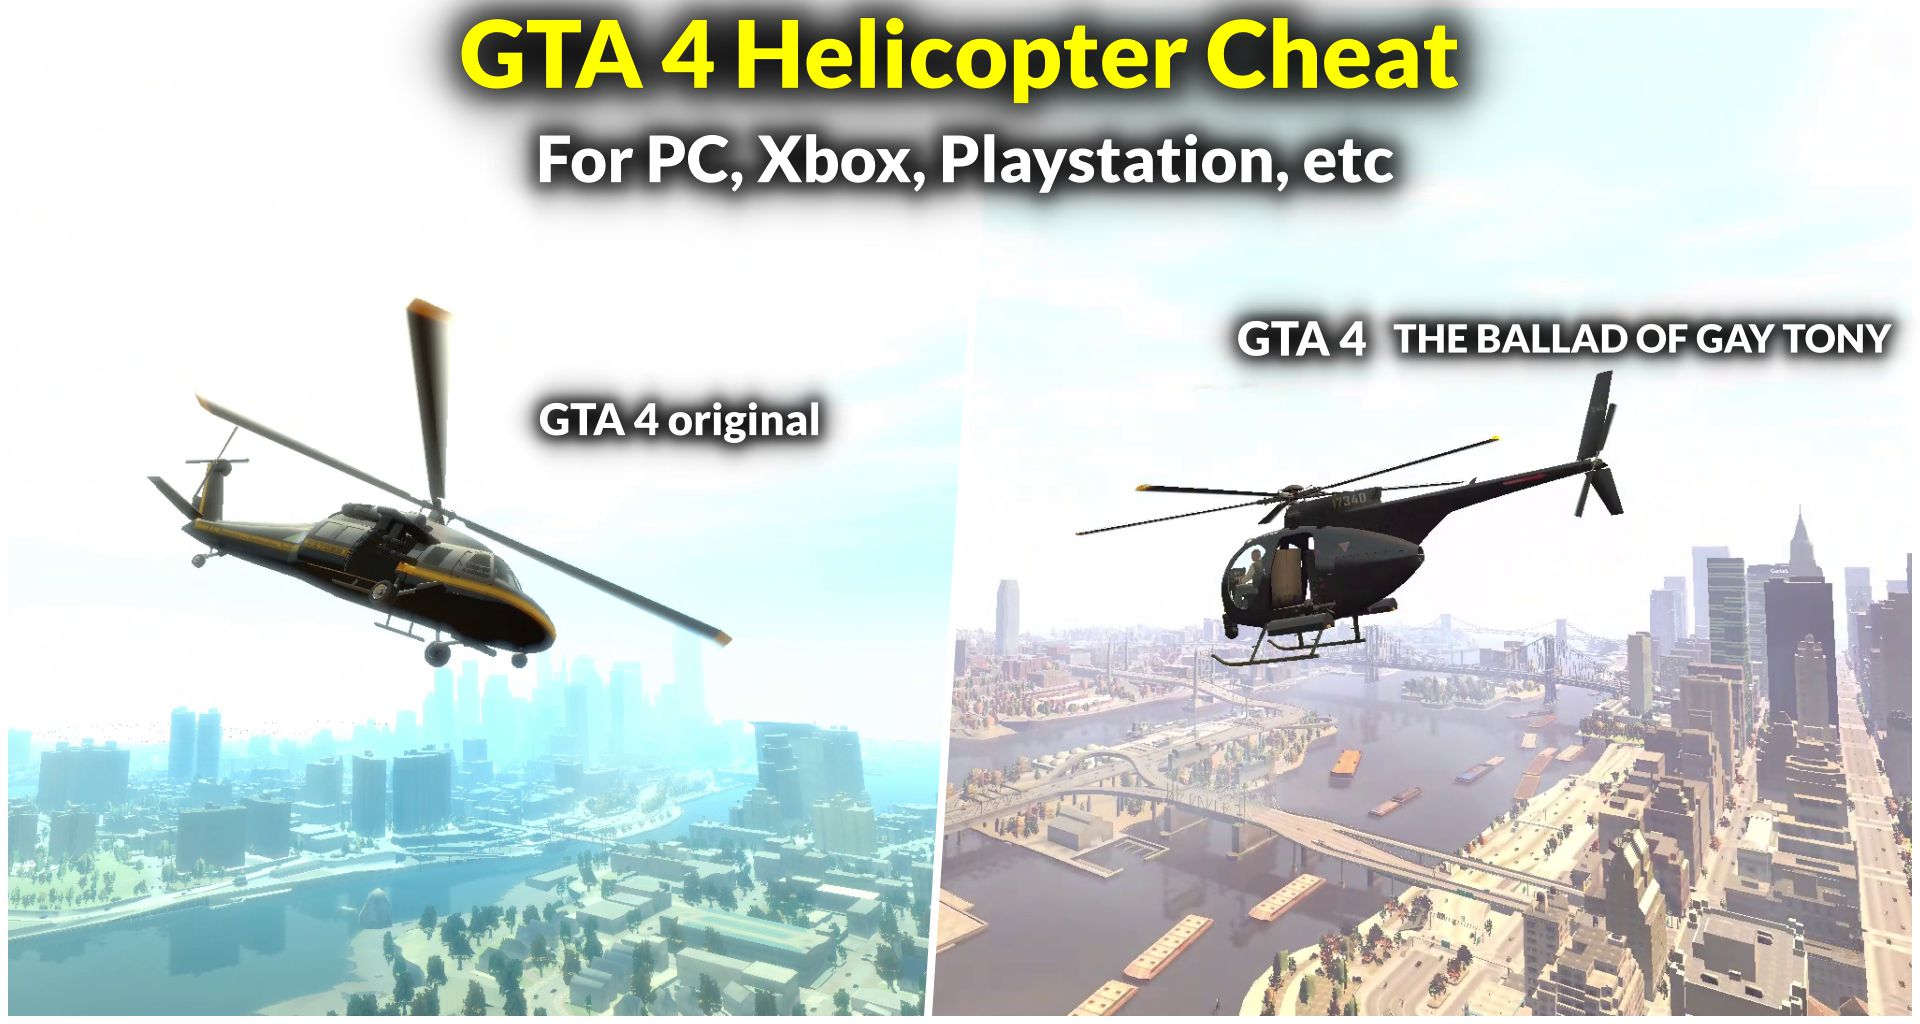 GTA 4 Helicopter Cheat - For PC, Xbox, Playstation, etc